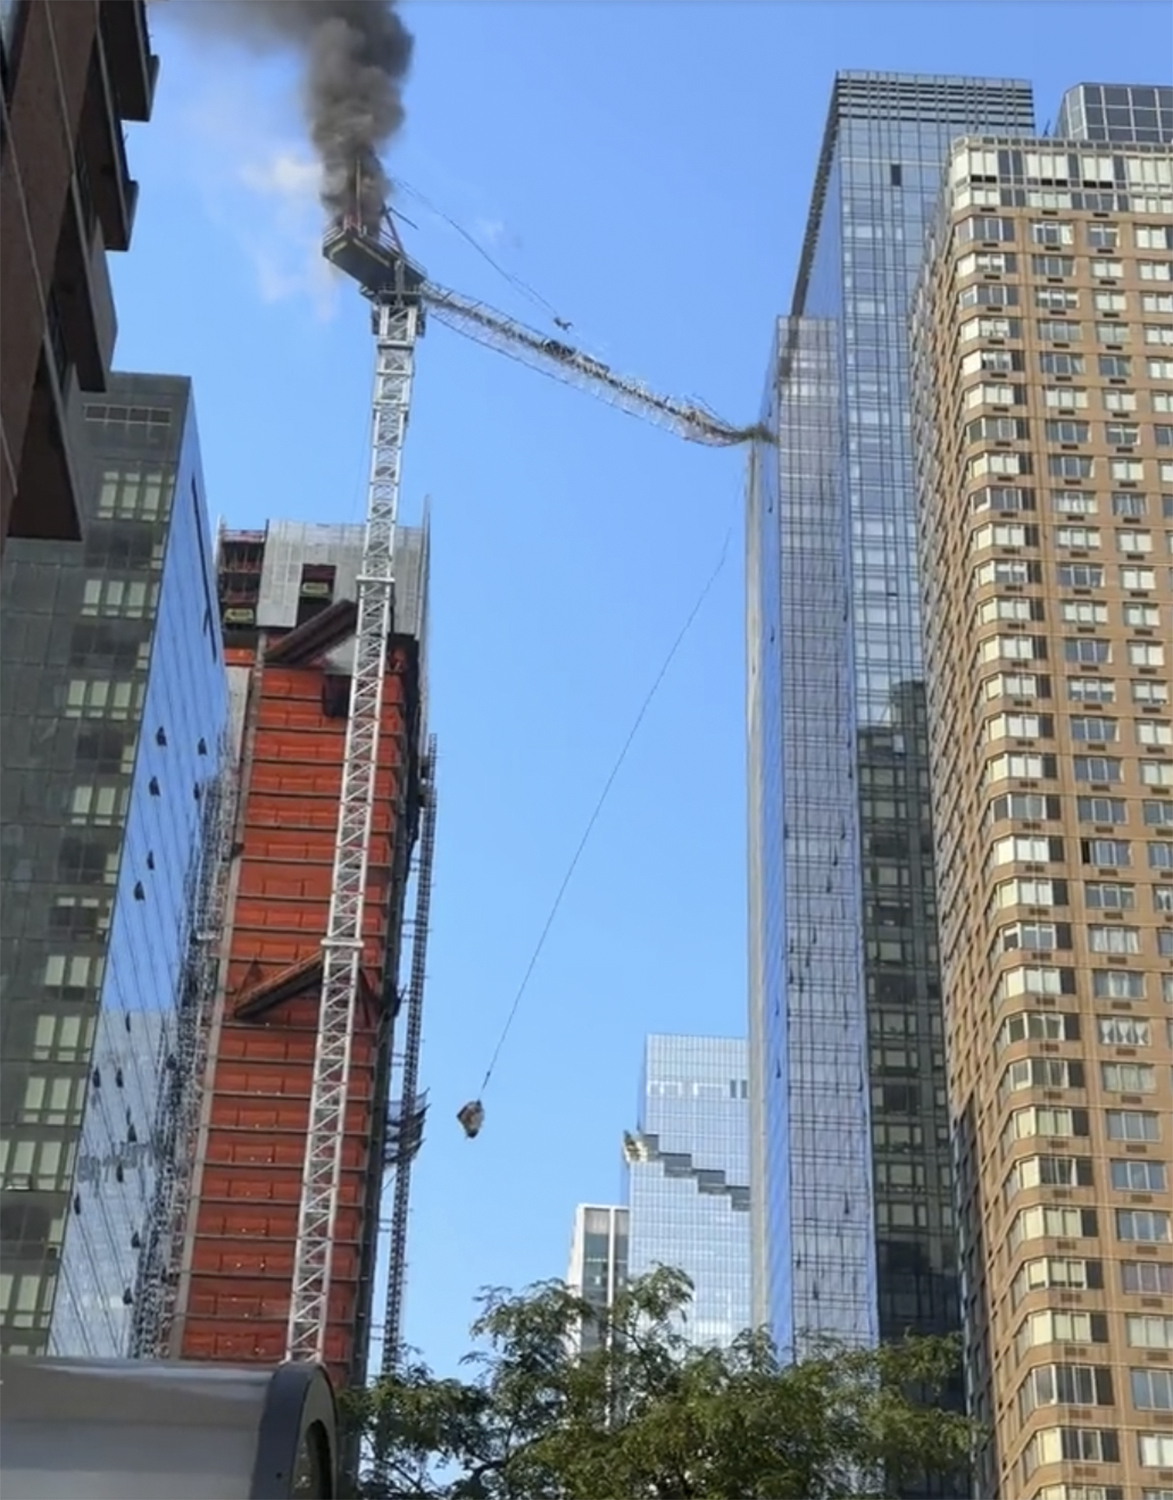 The arm of a tall construction crane crashes into a building and on to the street below after catching on fire in Manhattan on Wednesday, July 26, 2023 in New York. Some people suffered minor injuries, but no one died, according to Mayor Eric Adams. (Jimmy Farrington via AP)